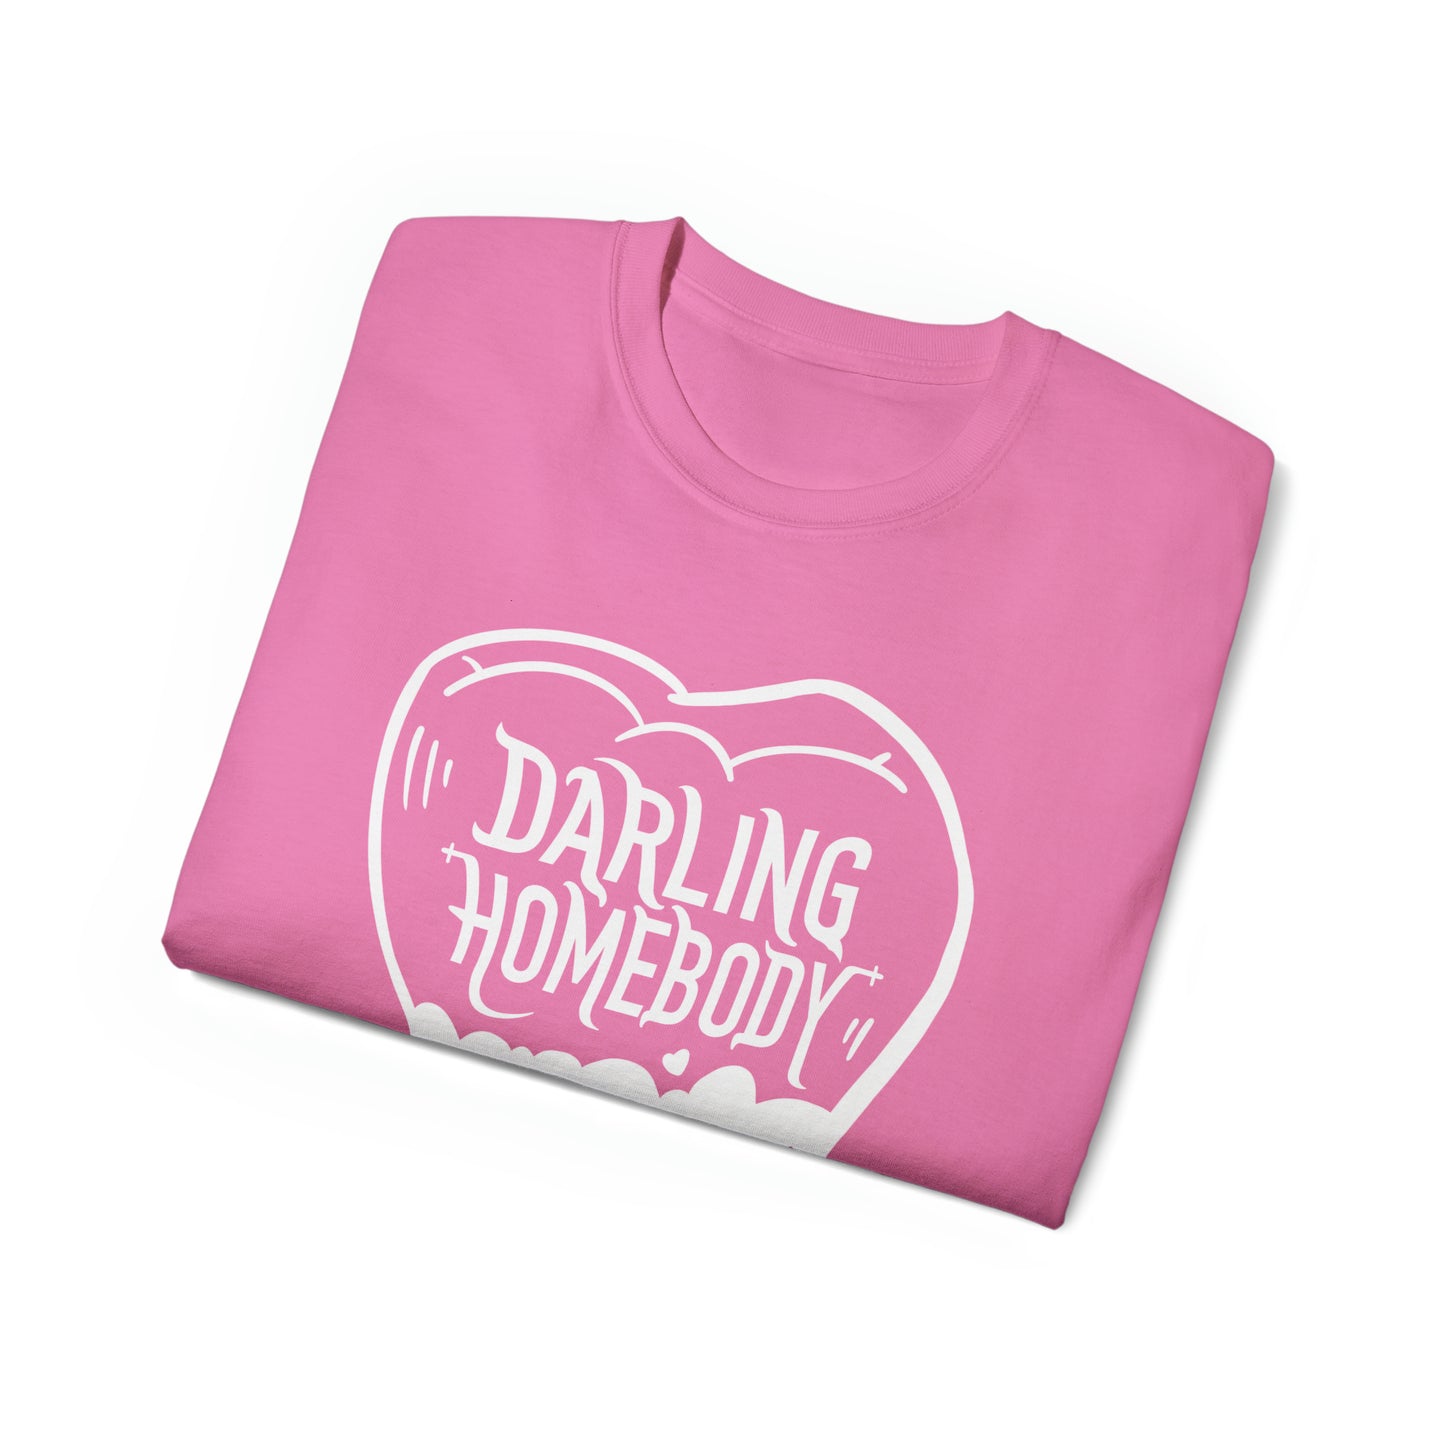 White Darling Homebody Tooth Unisex Ultra Cotton Tee